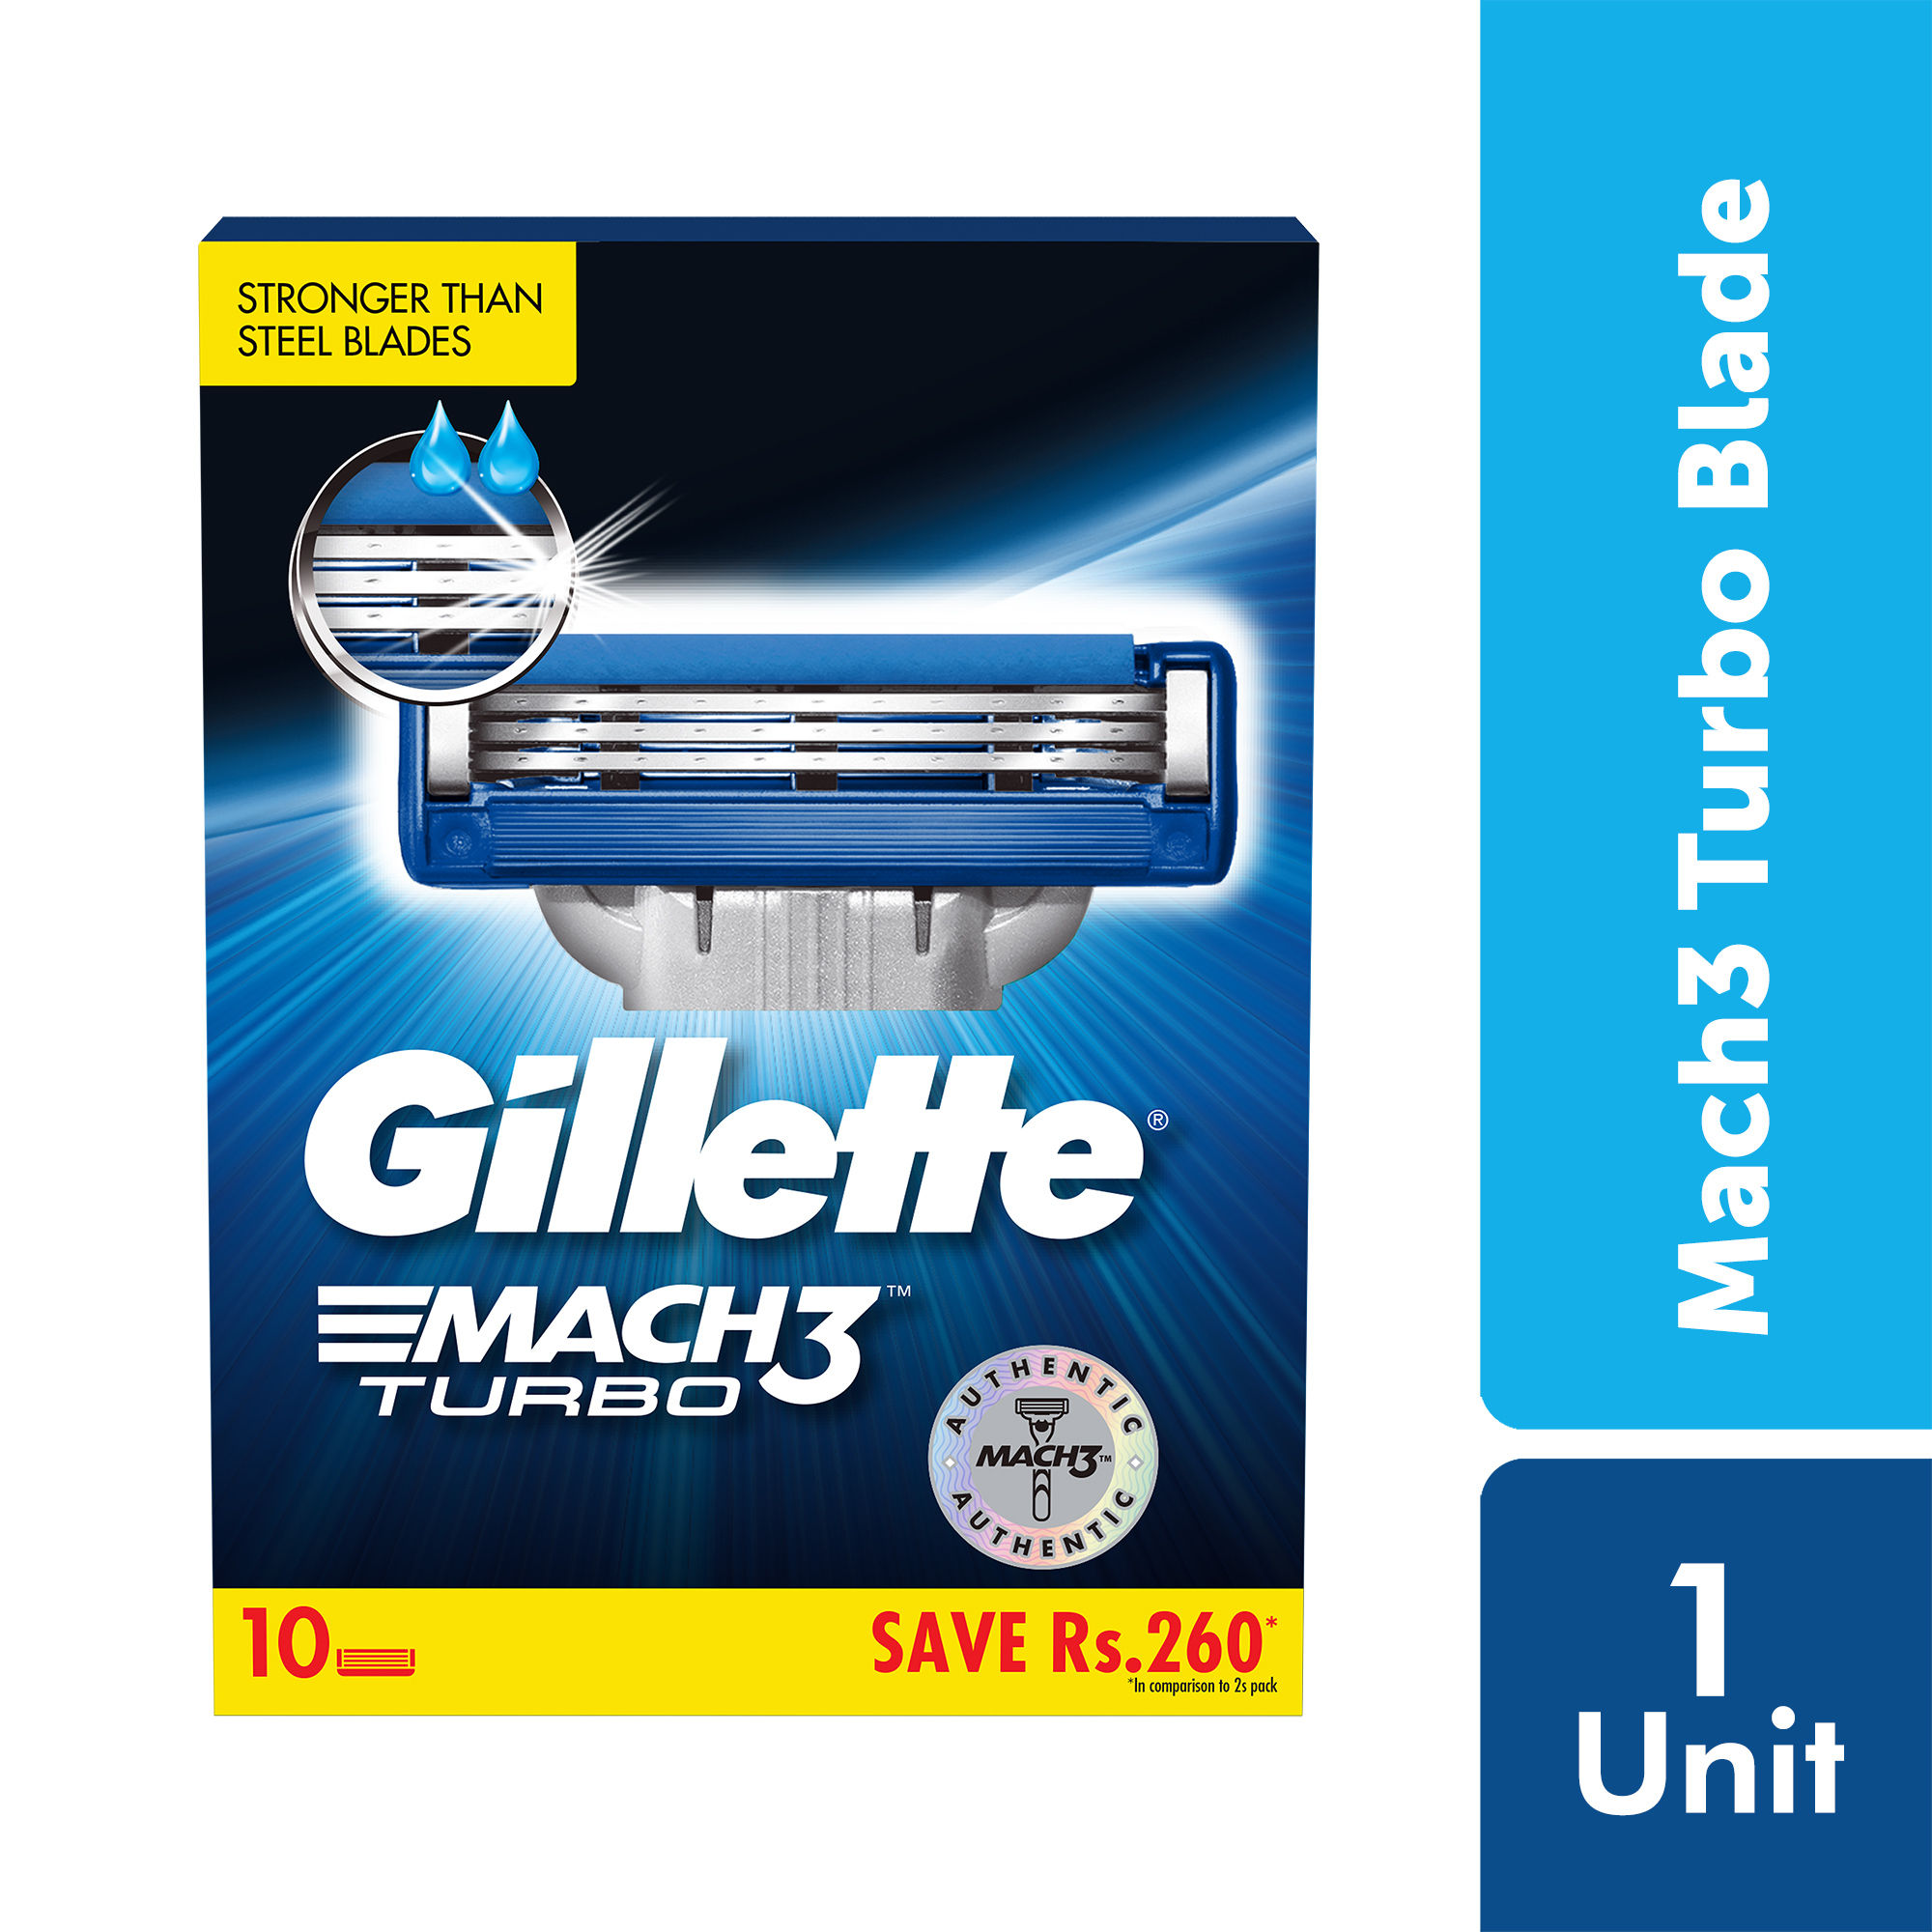 Gillette Mach Turbo 3 Shaving Blades Save Rs.260 (Pack Of 10 Cartridges)